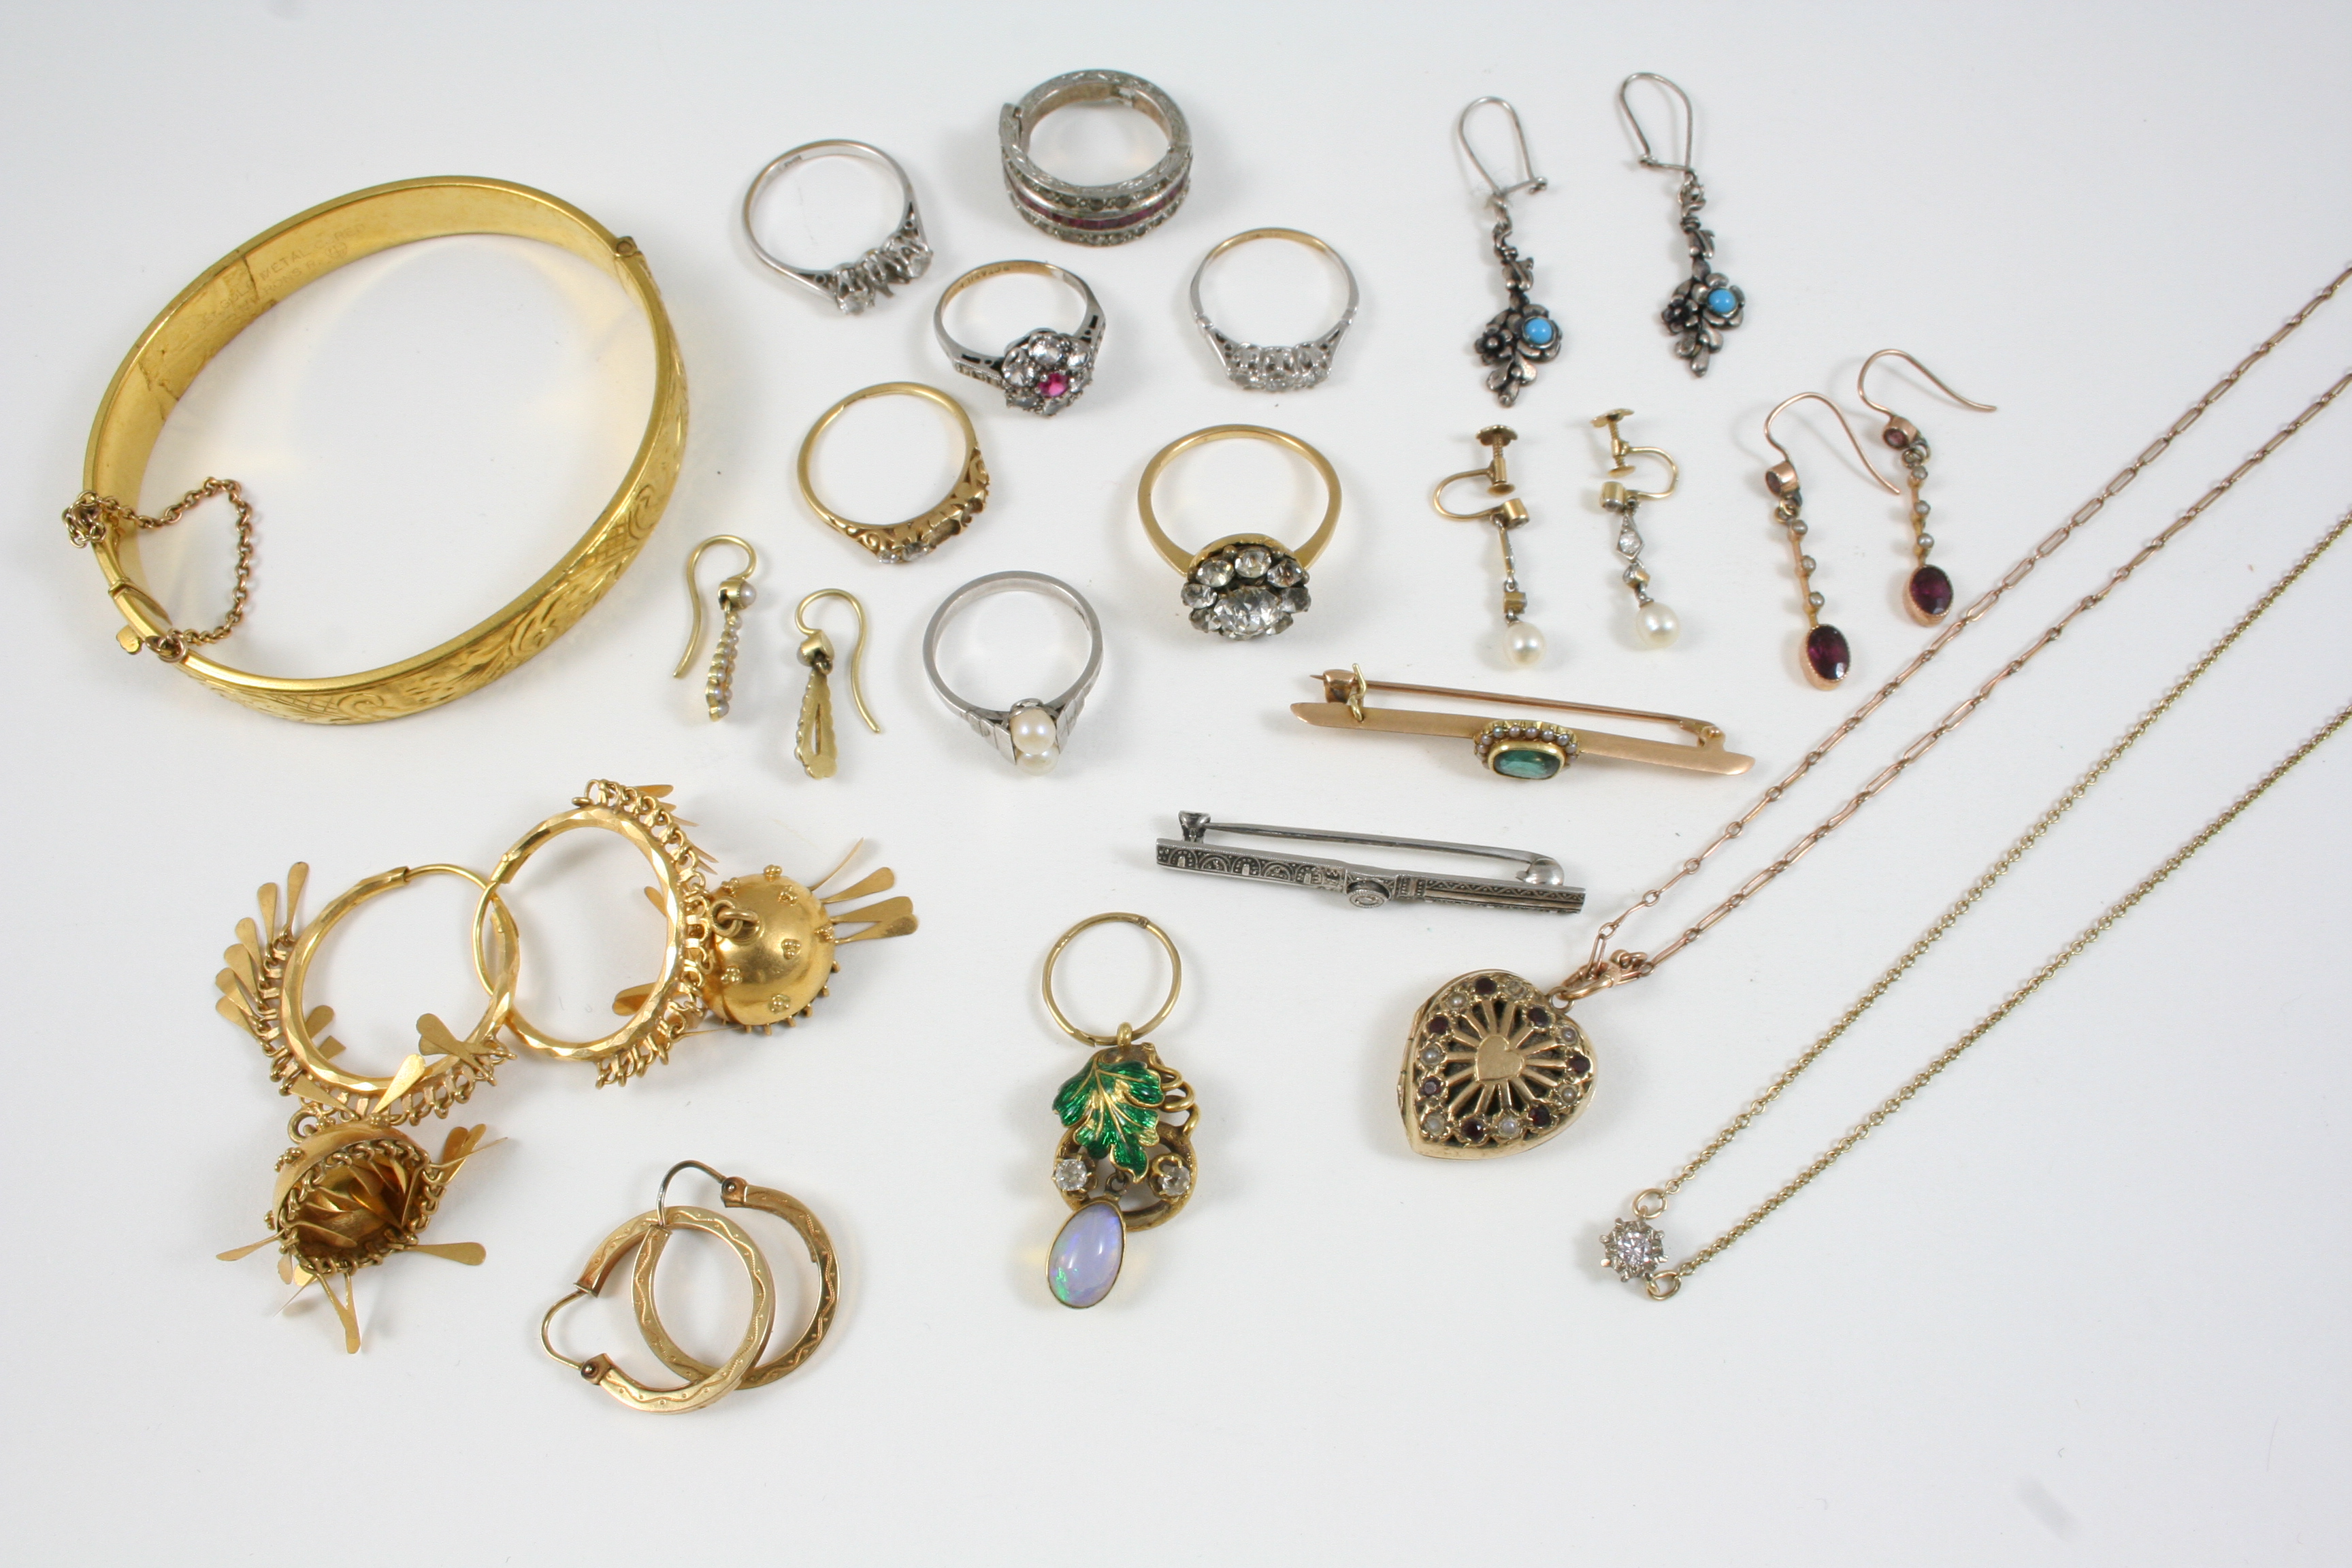 A QUANTITY OF JEWELLERY including a pair of gold hoop earrings, a pair of Creole drop earrings, a